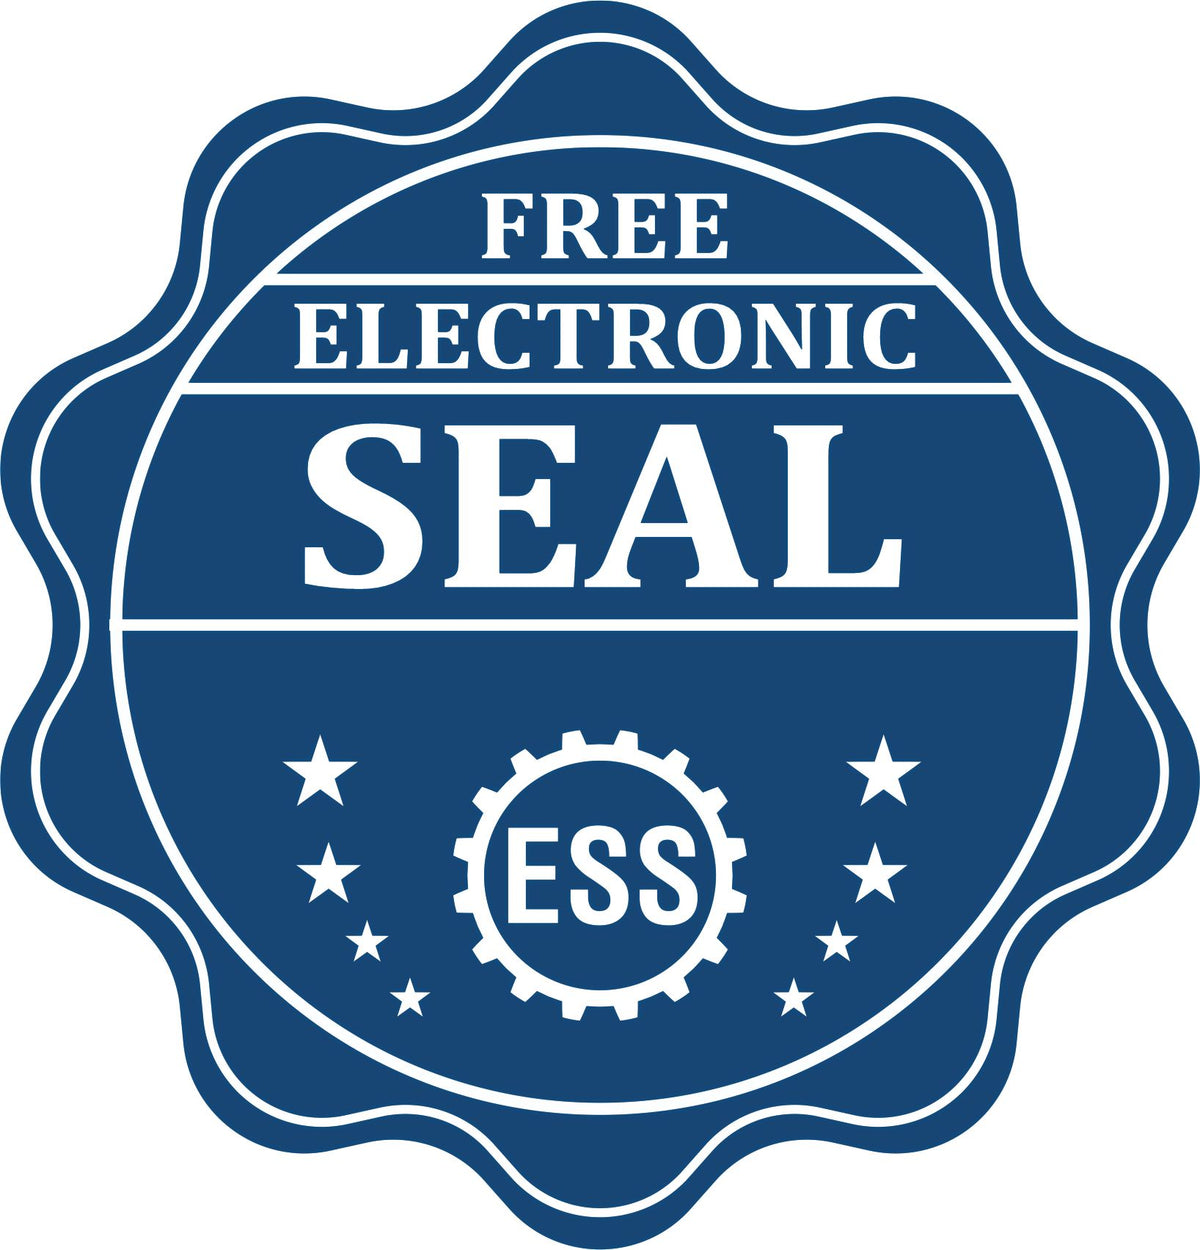 A badge showing a free electronic seal for the Slim Pre-Inked West Virginia Professional Engineer Seal Stamp with stars and the ESS gear on the emblem.